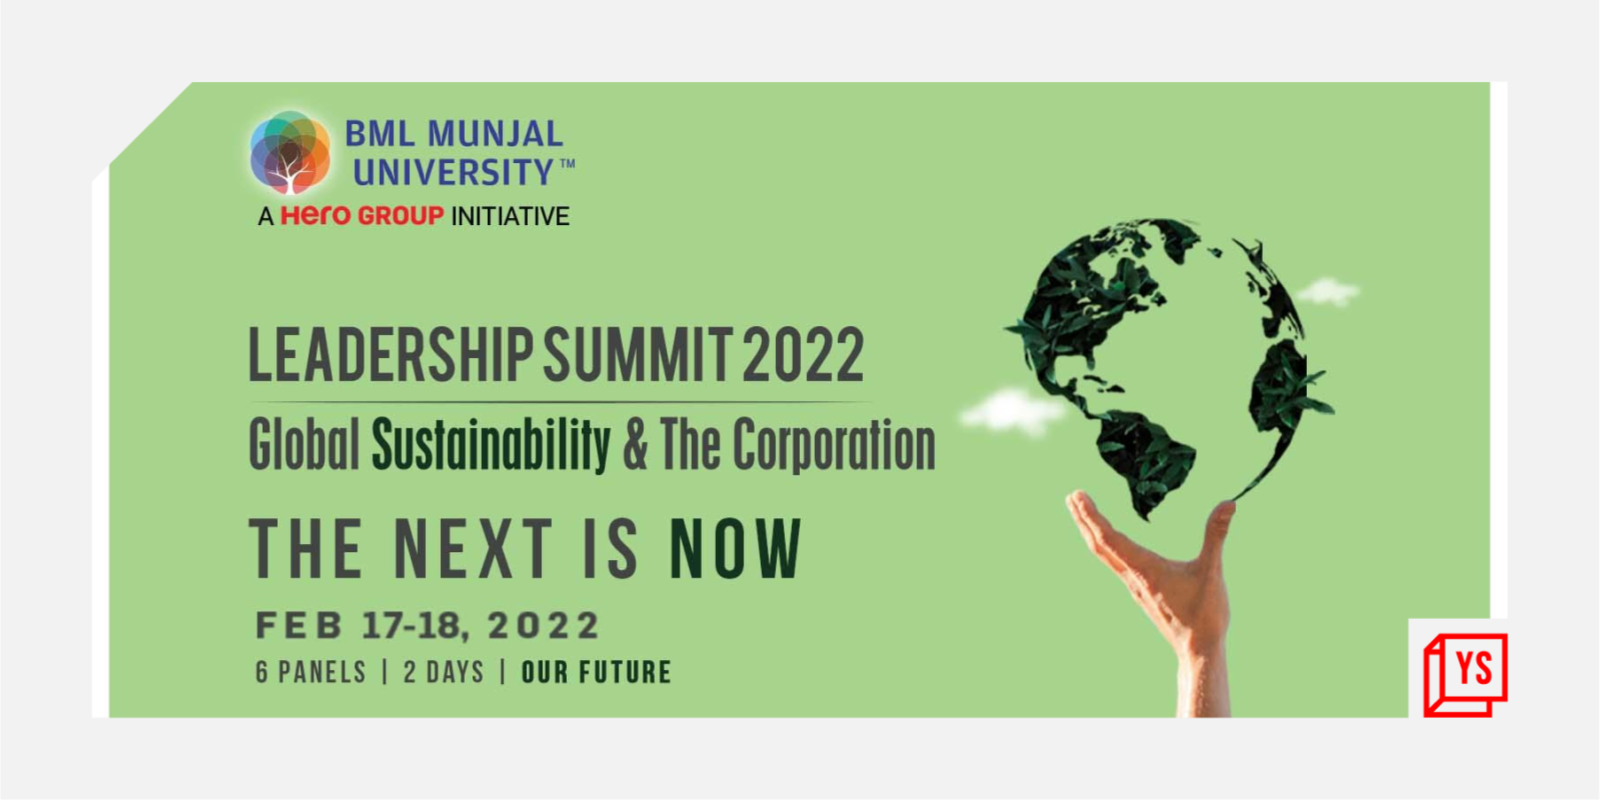 BML Munjal University Leadership Summit 2022: How India’s enterprises hold the key to achieving its climate target